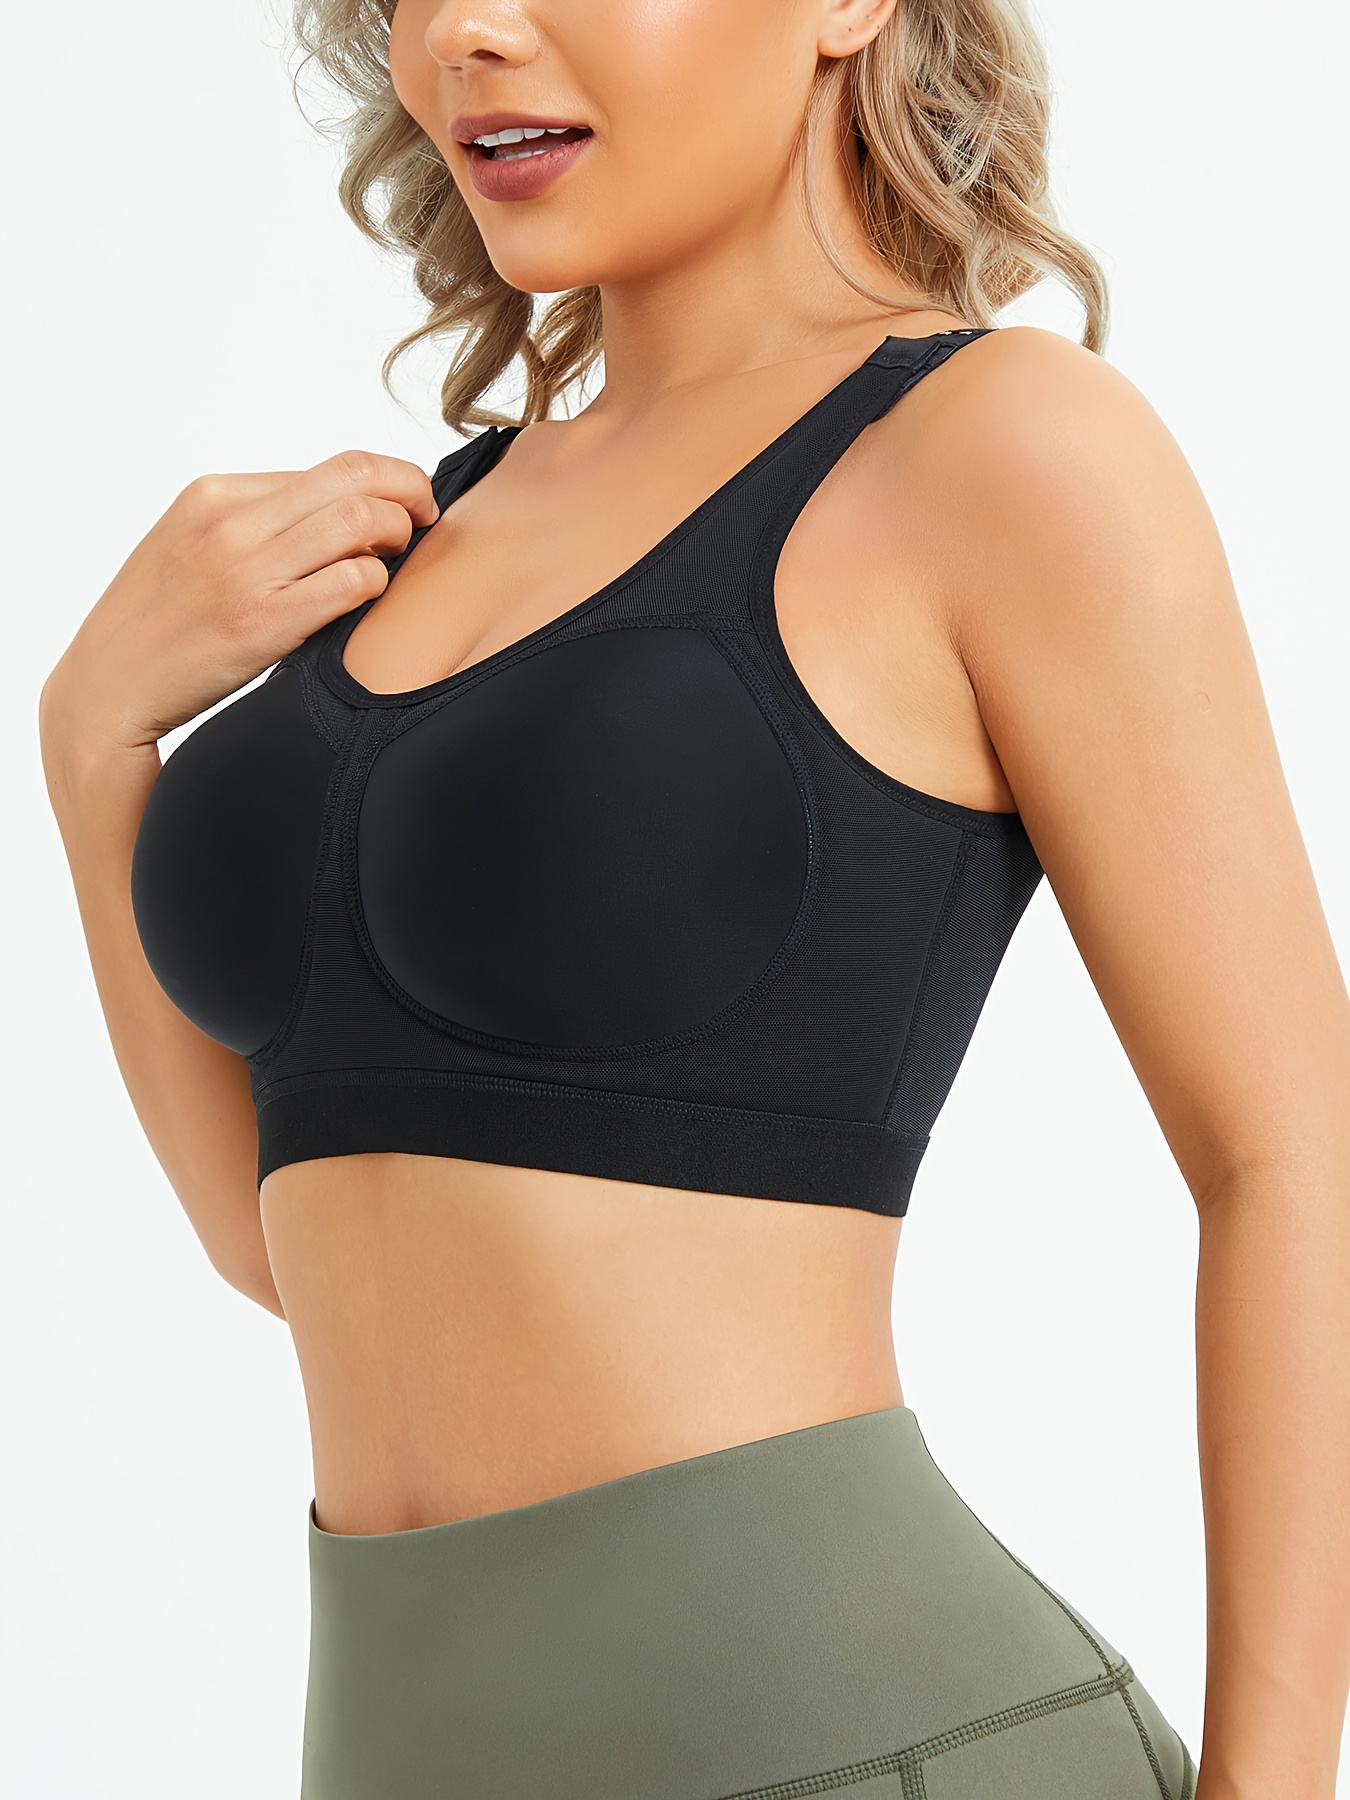 Operation Recovery Gifts for Women Sports Bra Padded Zip True Kind